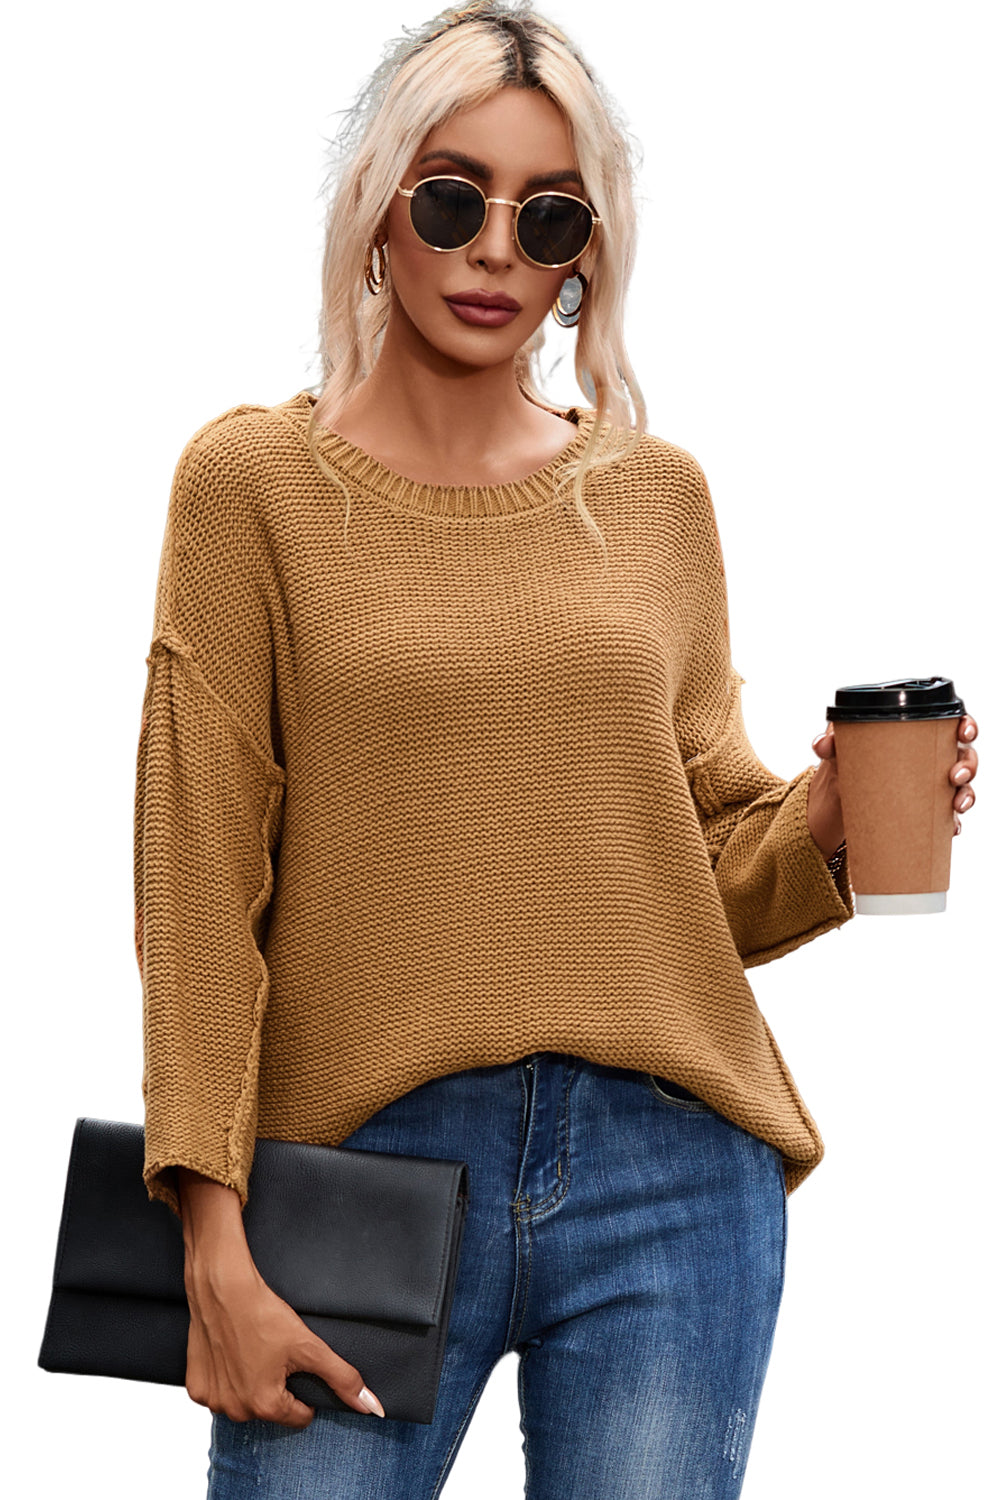 Brown Slouchy Textured Knit Loose Sweater